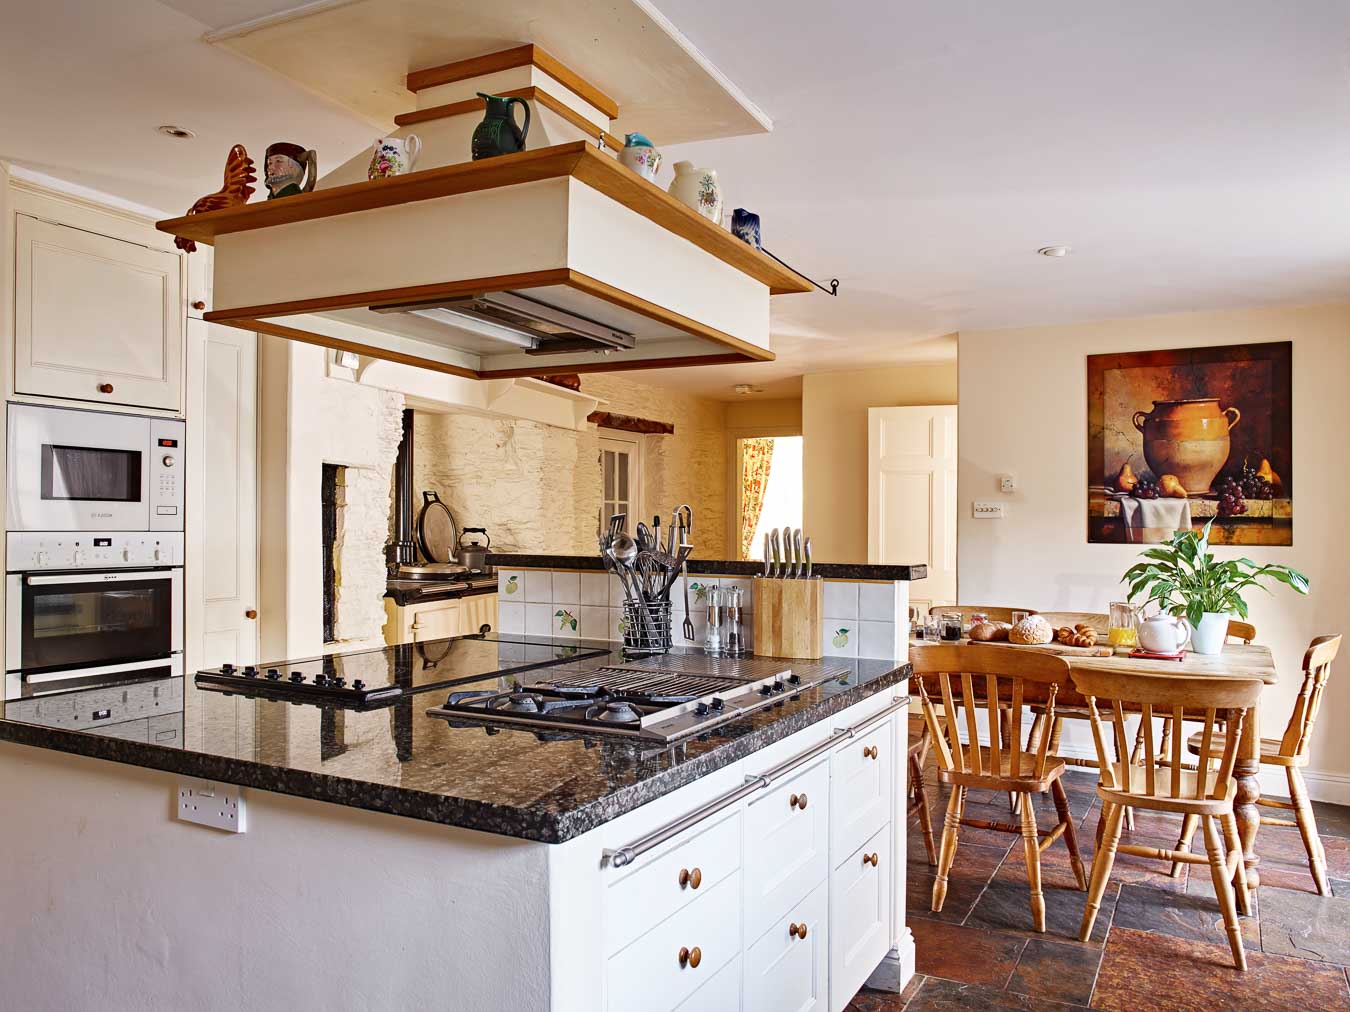 Flear House kitchen with is oven stack, electric hobs and gas burner.